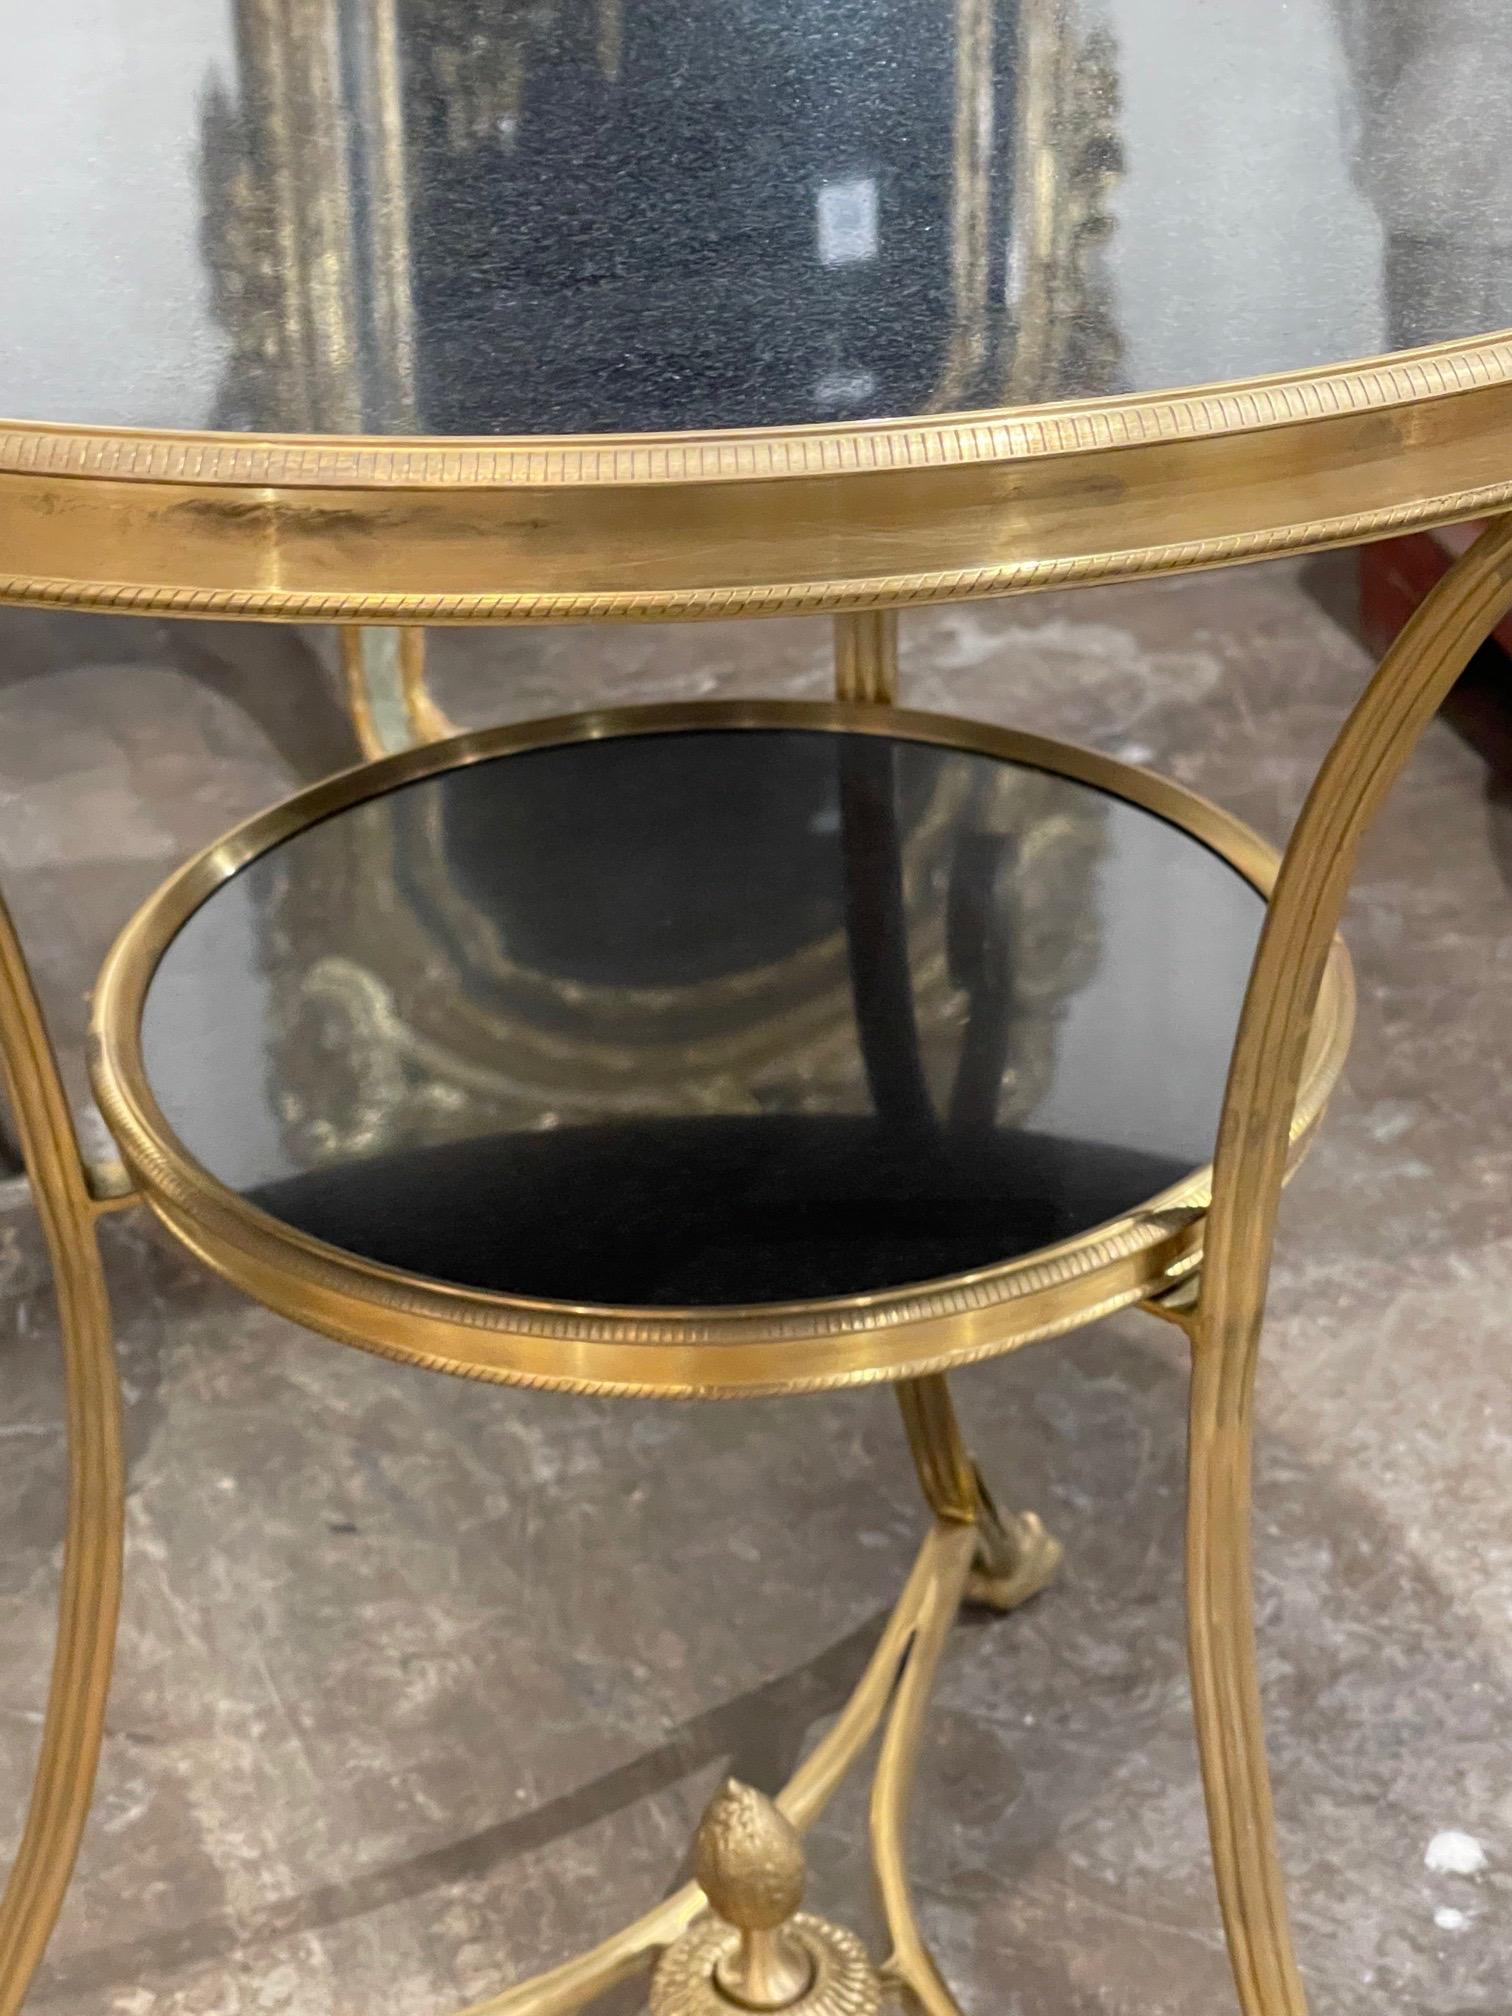 20th Century French Gilt Bronze and Granite Gueridon Tables